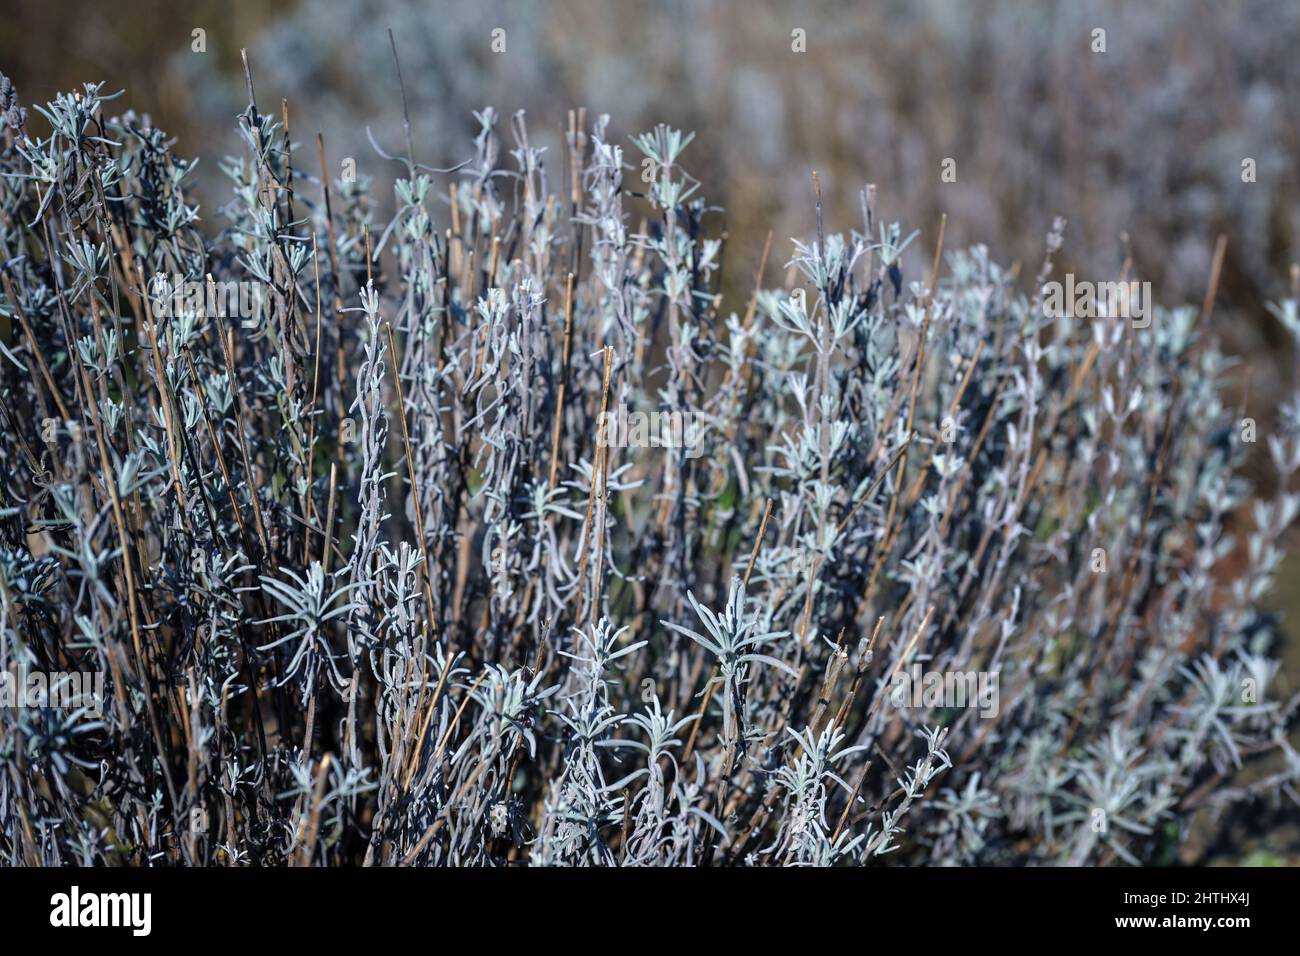 cut lavender bushes with gray foliage in winter or spring, copy space, selected focus, narrow depth of field Stock Photo